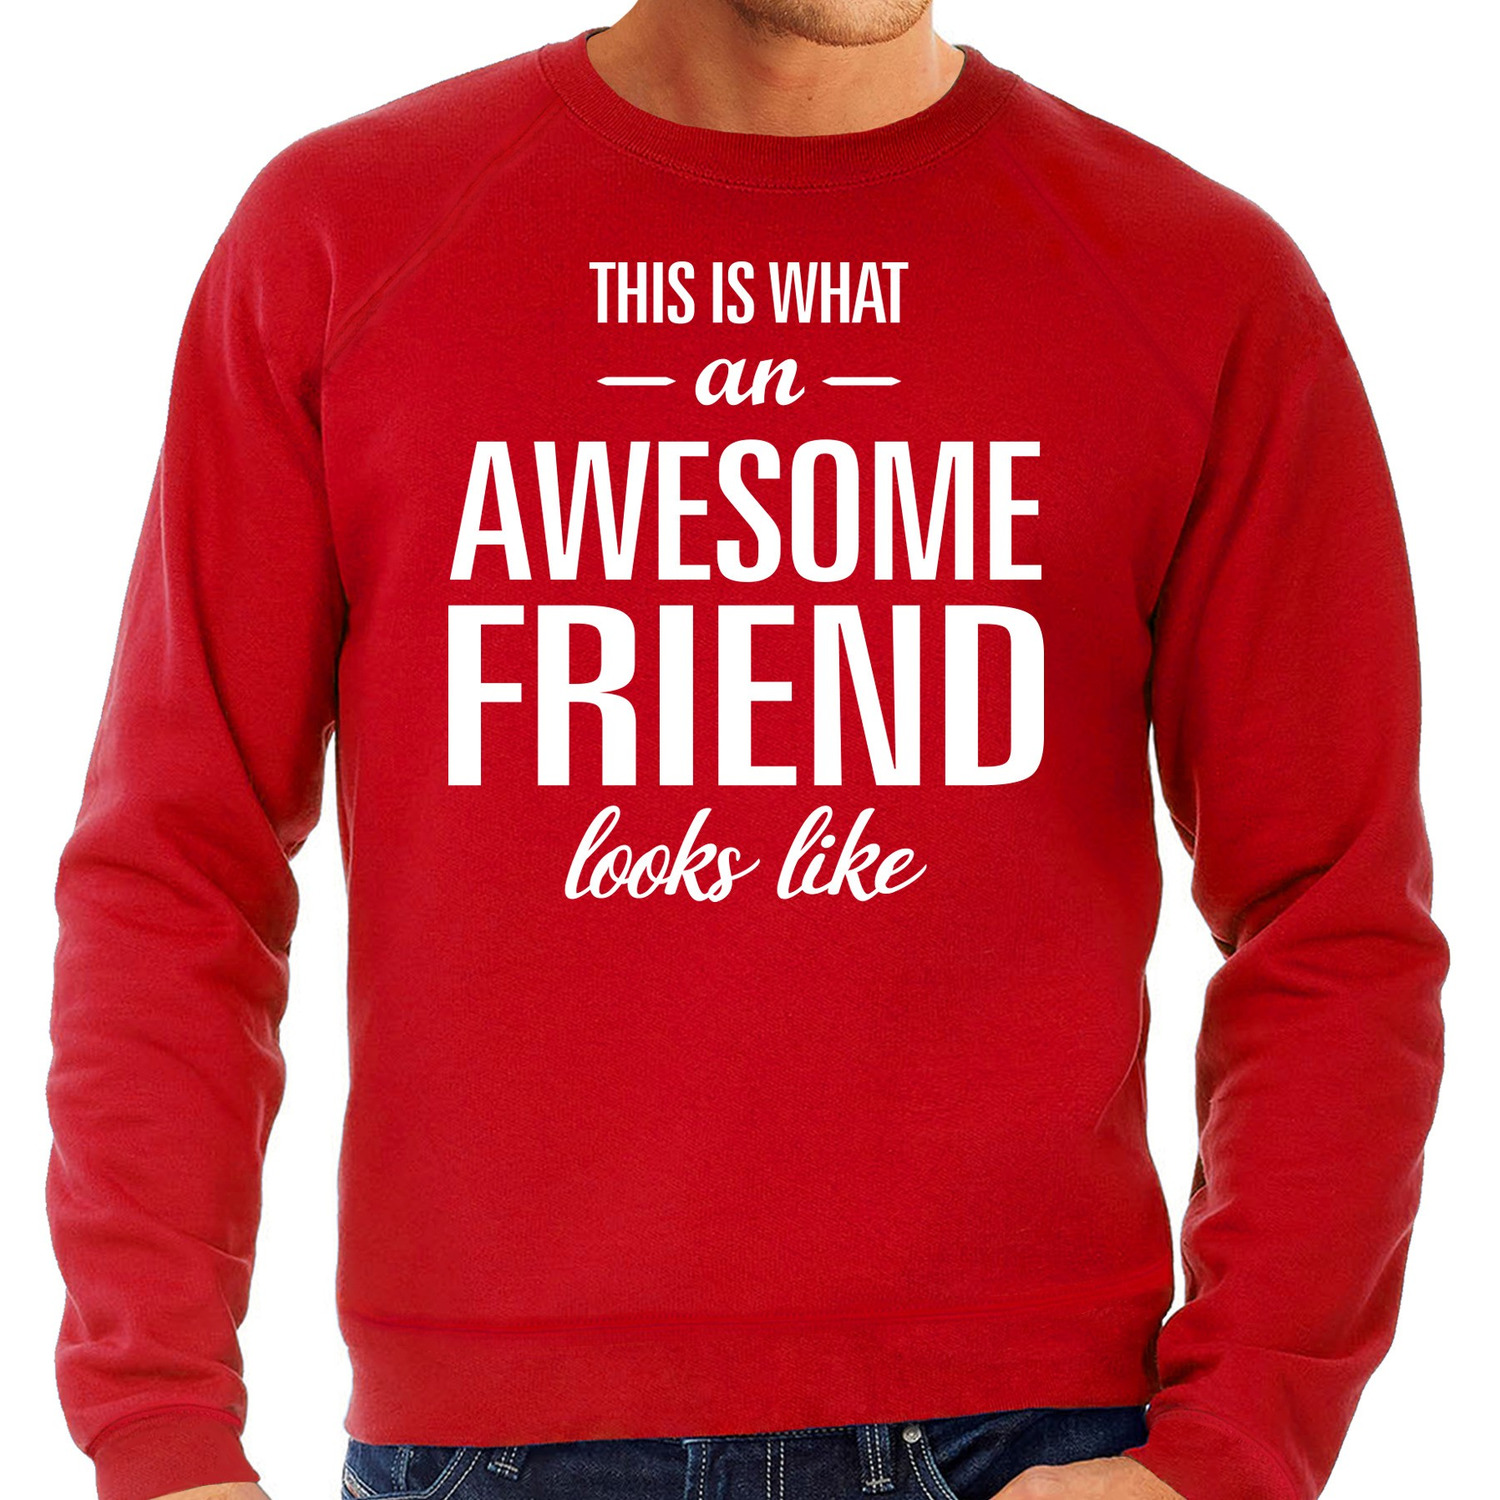 Awesome friend / vriend cadeau sweater rood heren